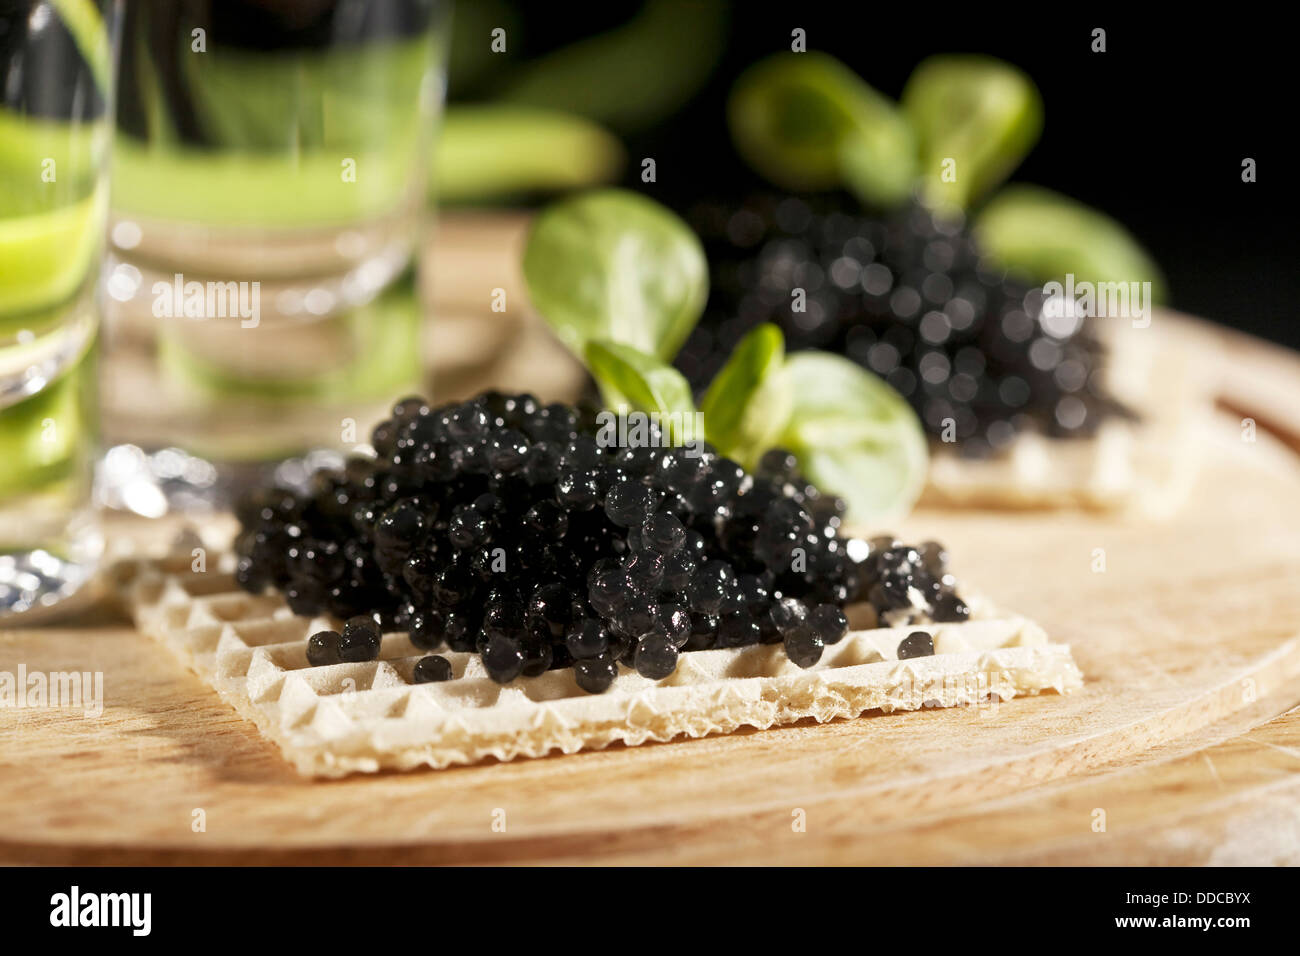 vodka and sandwiches with black caviar on black background Stock Photo